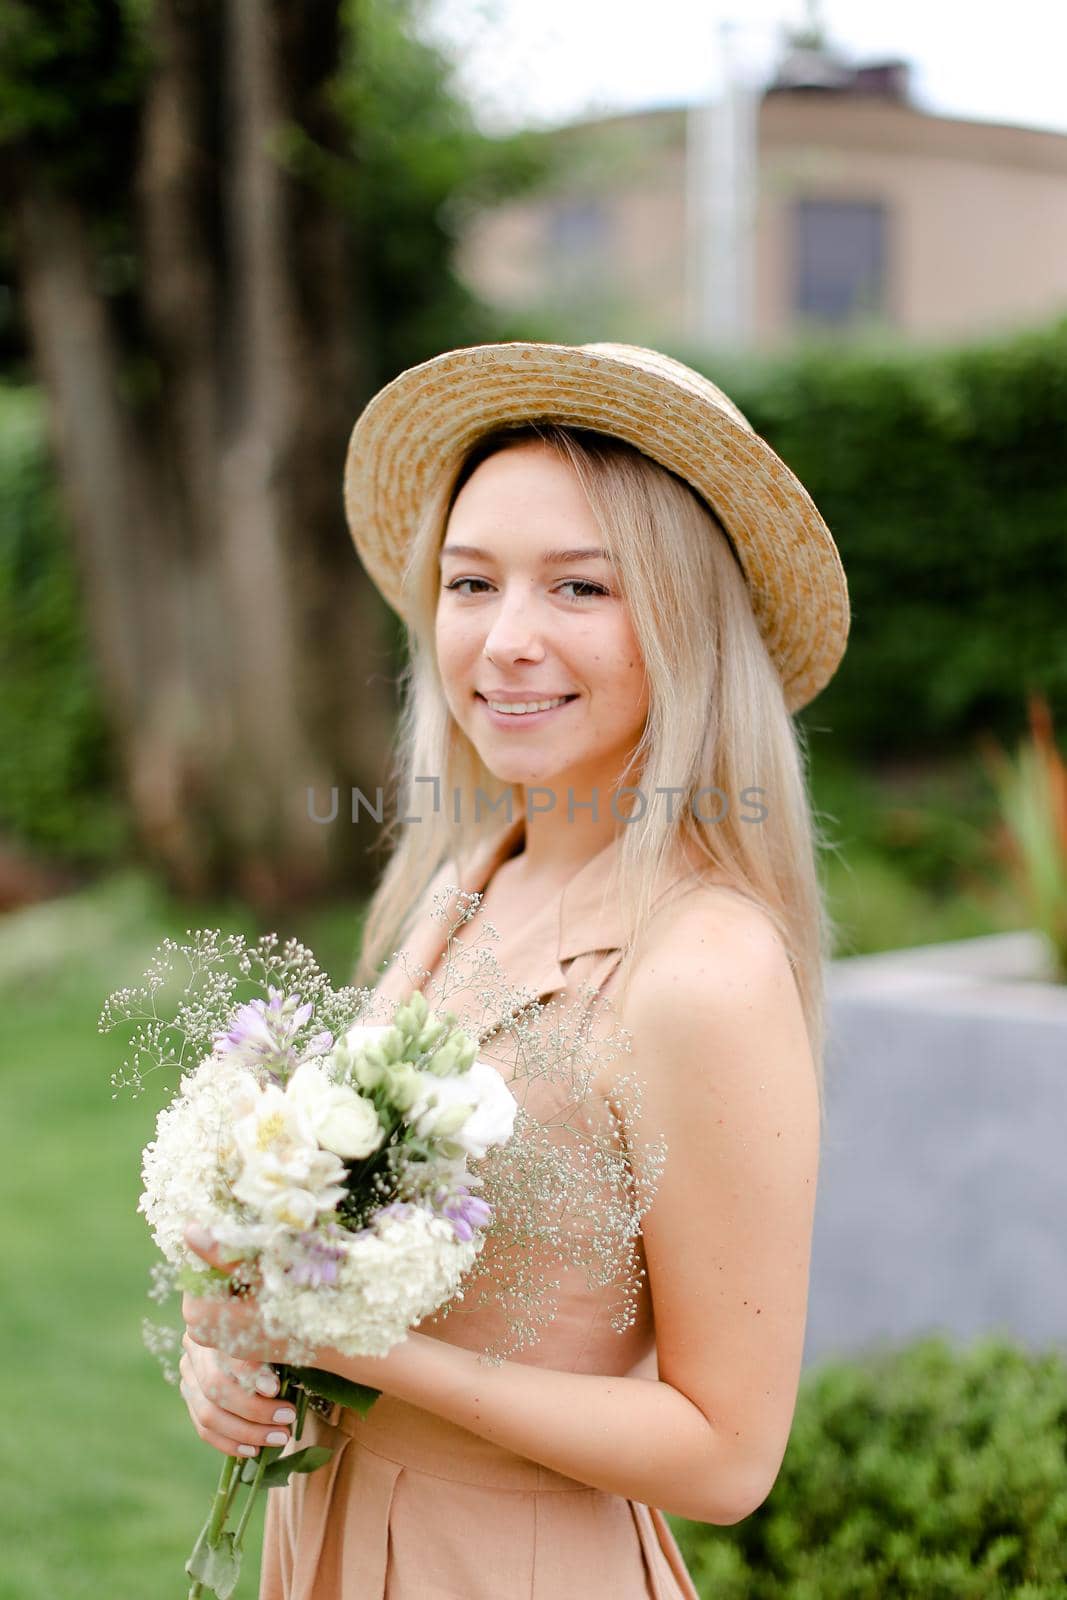 Young caucasian girl standing in yeard with bouquet of flowers and wearing hat. by sisterspro